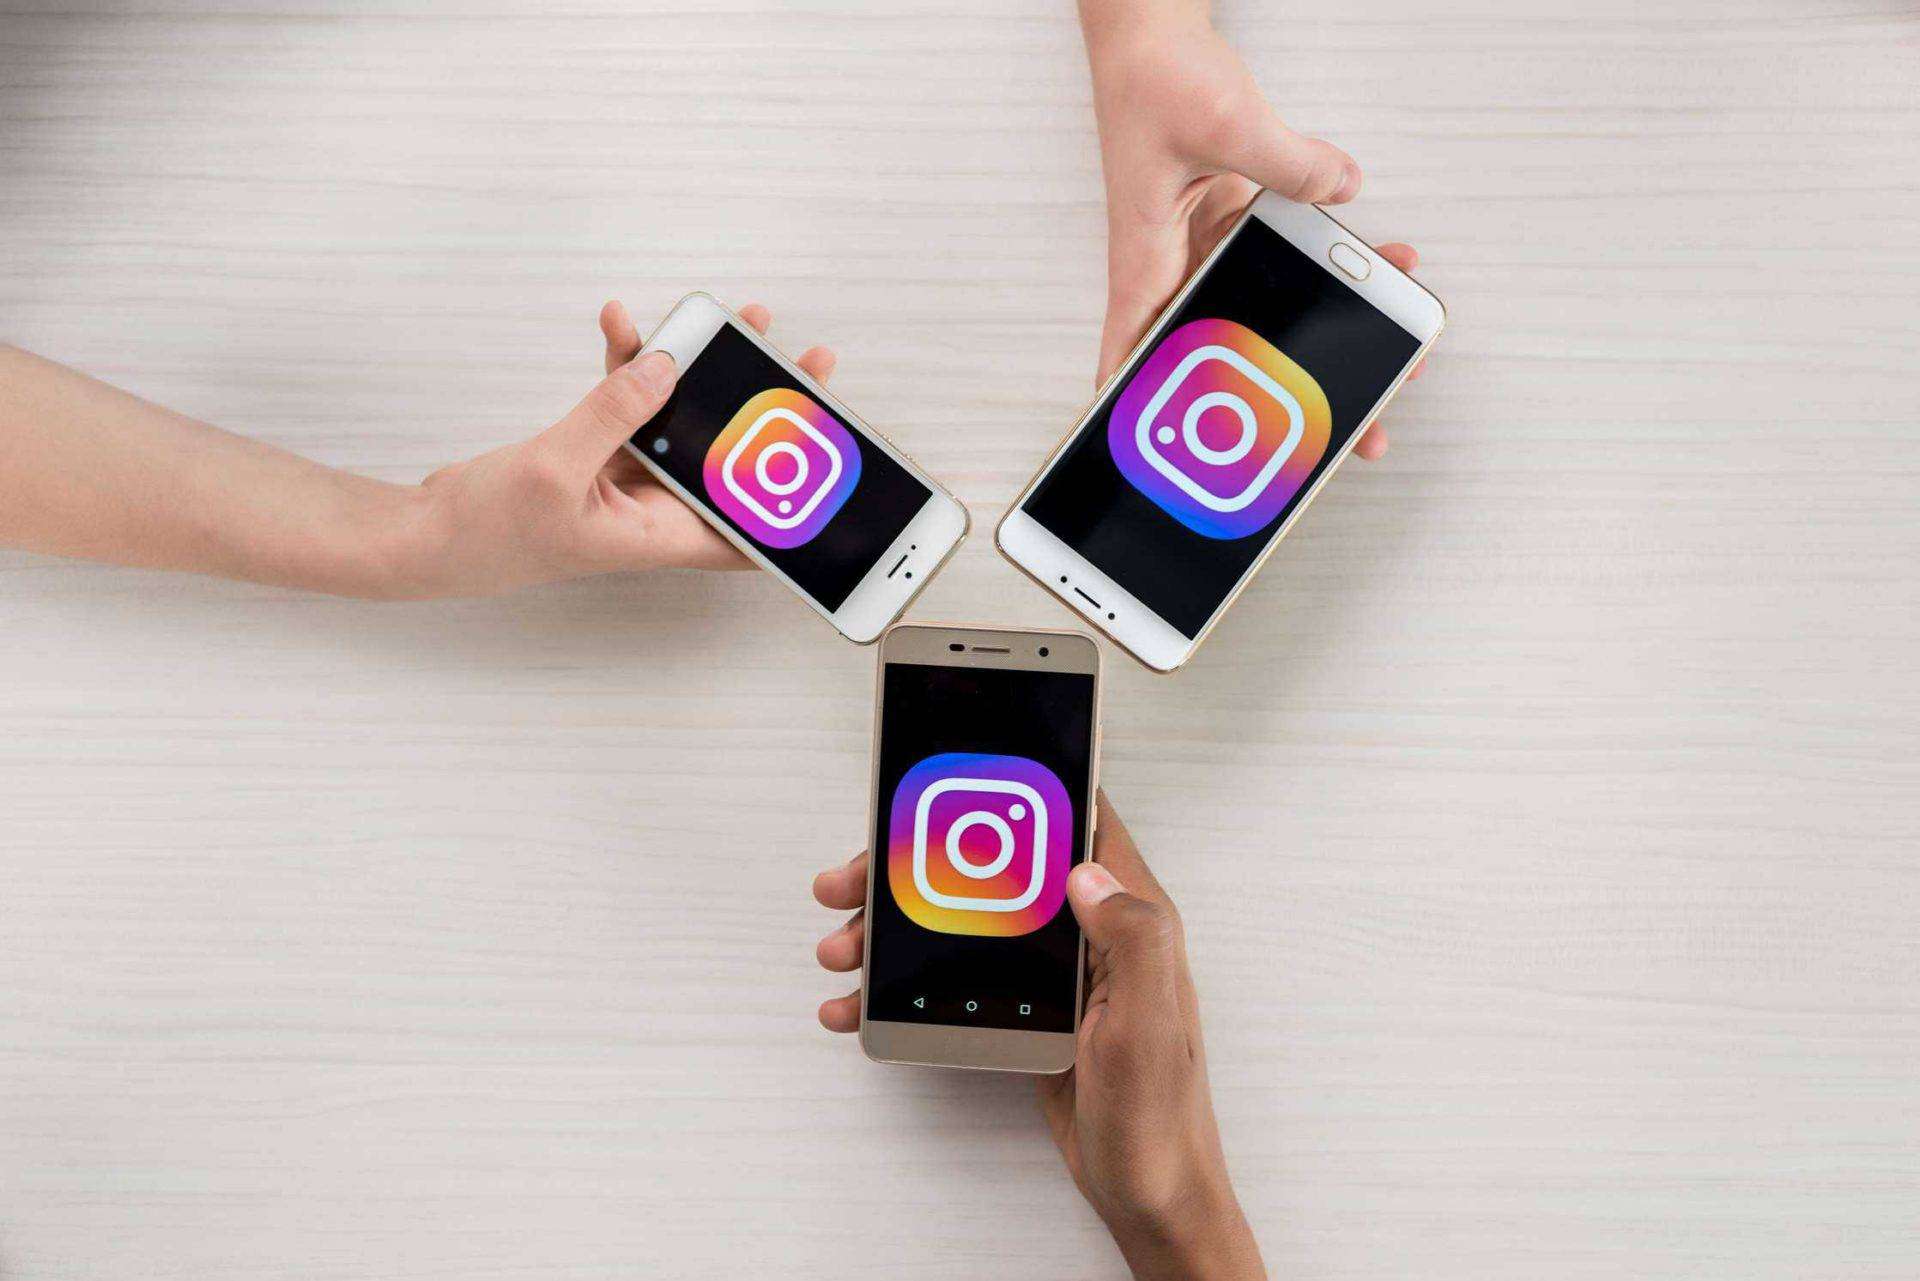 New Marketing Opportunities on Instagram (that Small Business Owners Will Love)